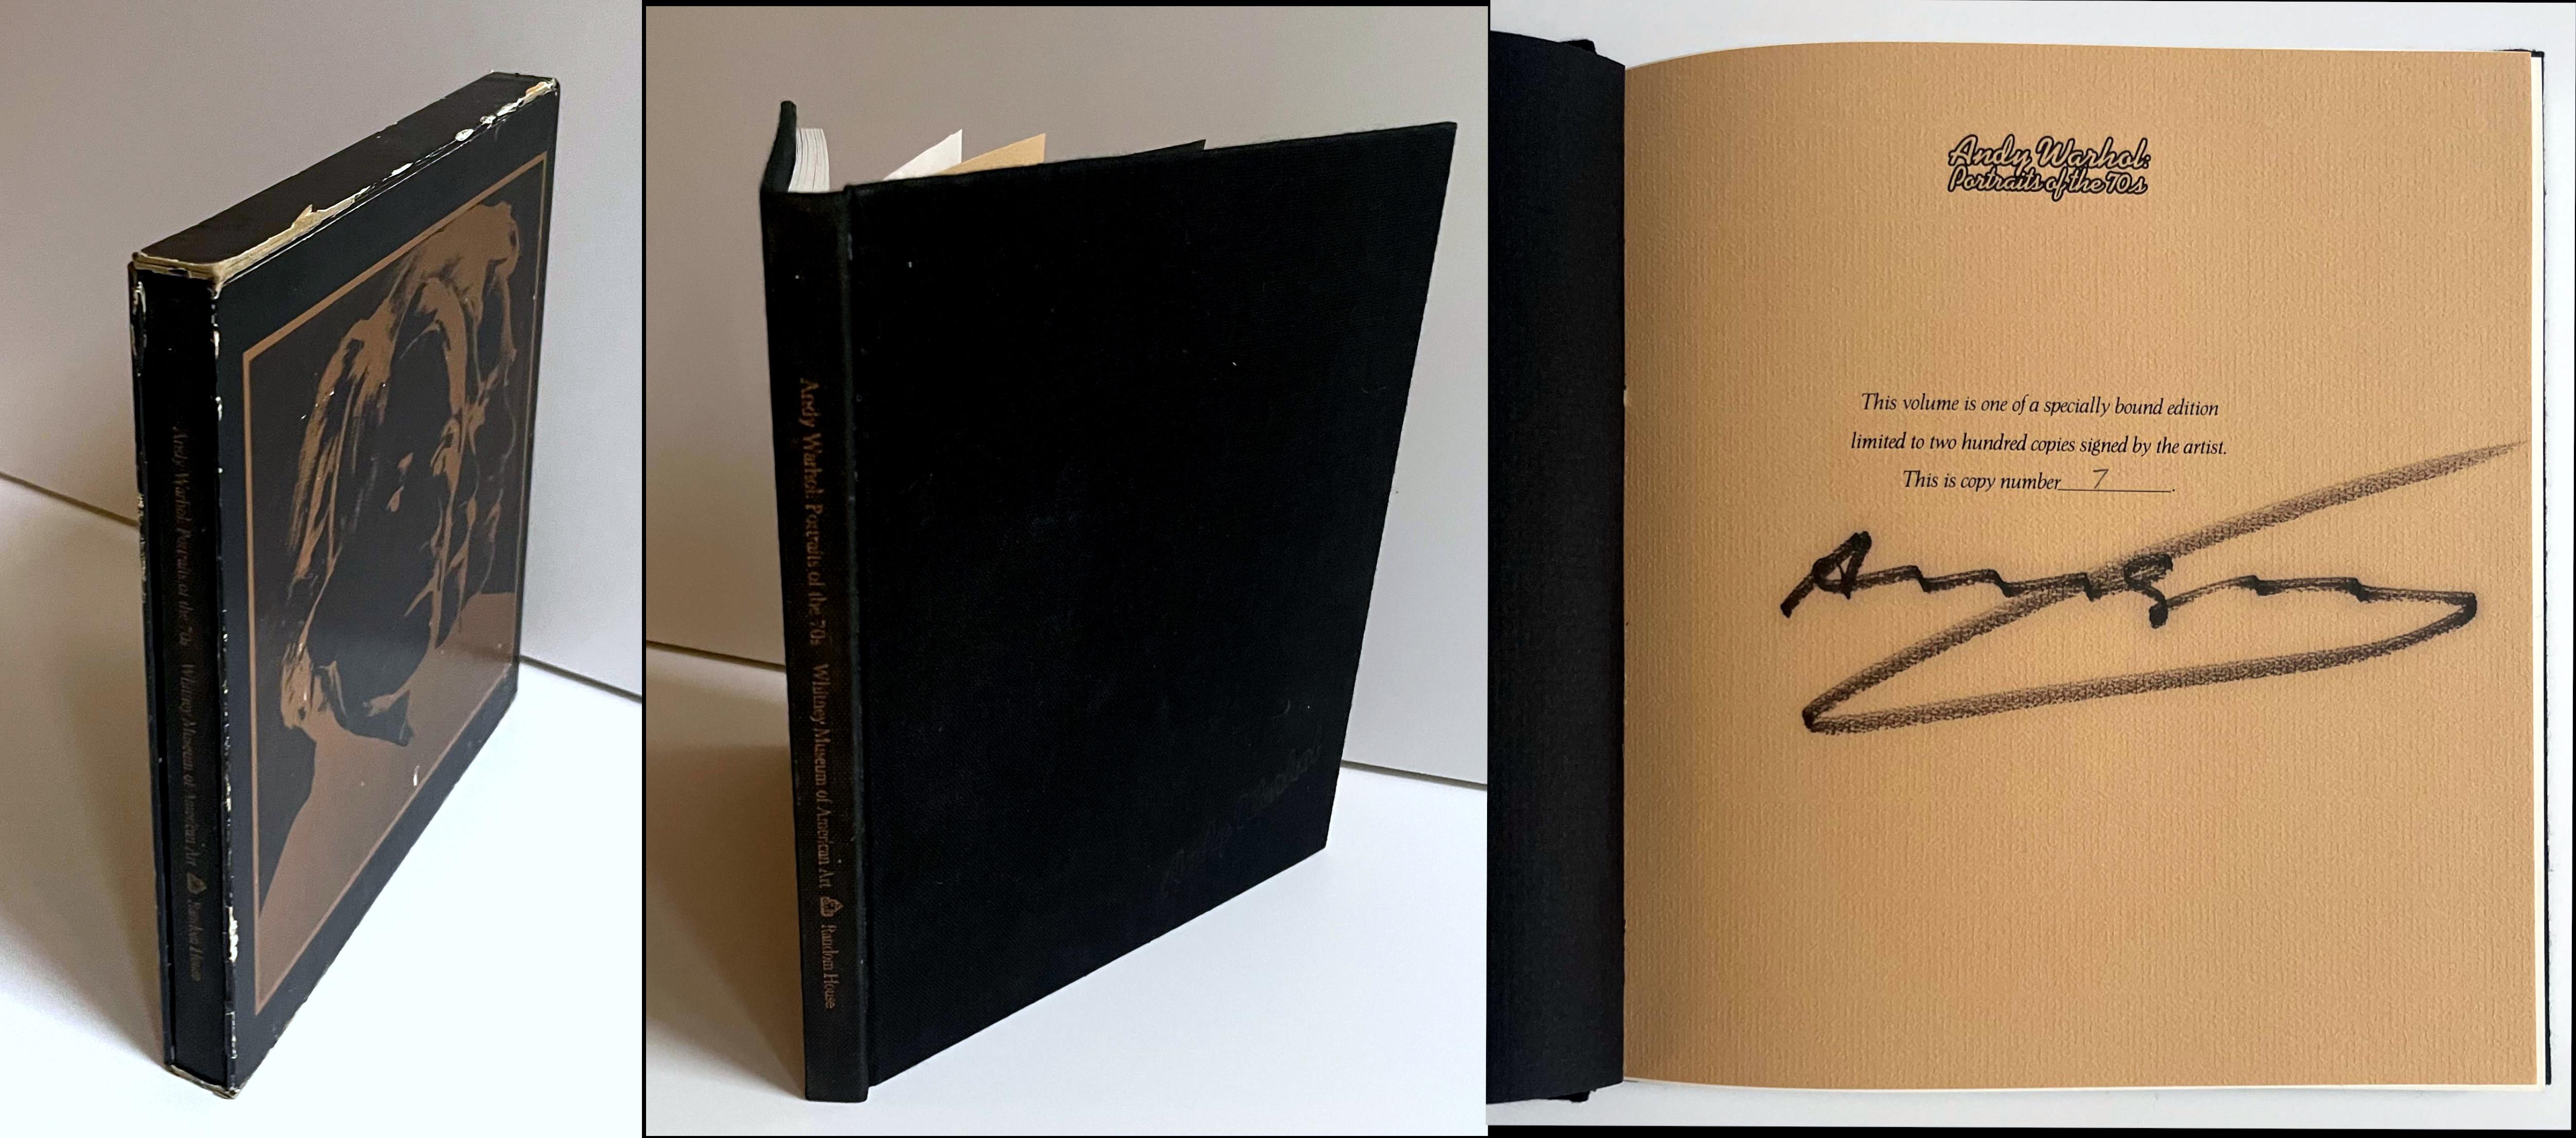 Andy Warhol
Portraits of the 1970s (Deluxe Limited Edition Monograph with Slipcase, Hand Signed and Numbered by Warhol), 1979
Hand Signed and Numbered Hardback Monograph with 120 Bound offset lithographs and text, held in original slipcase (boxed